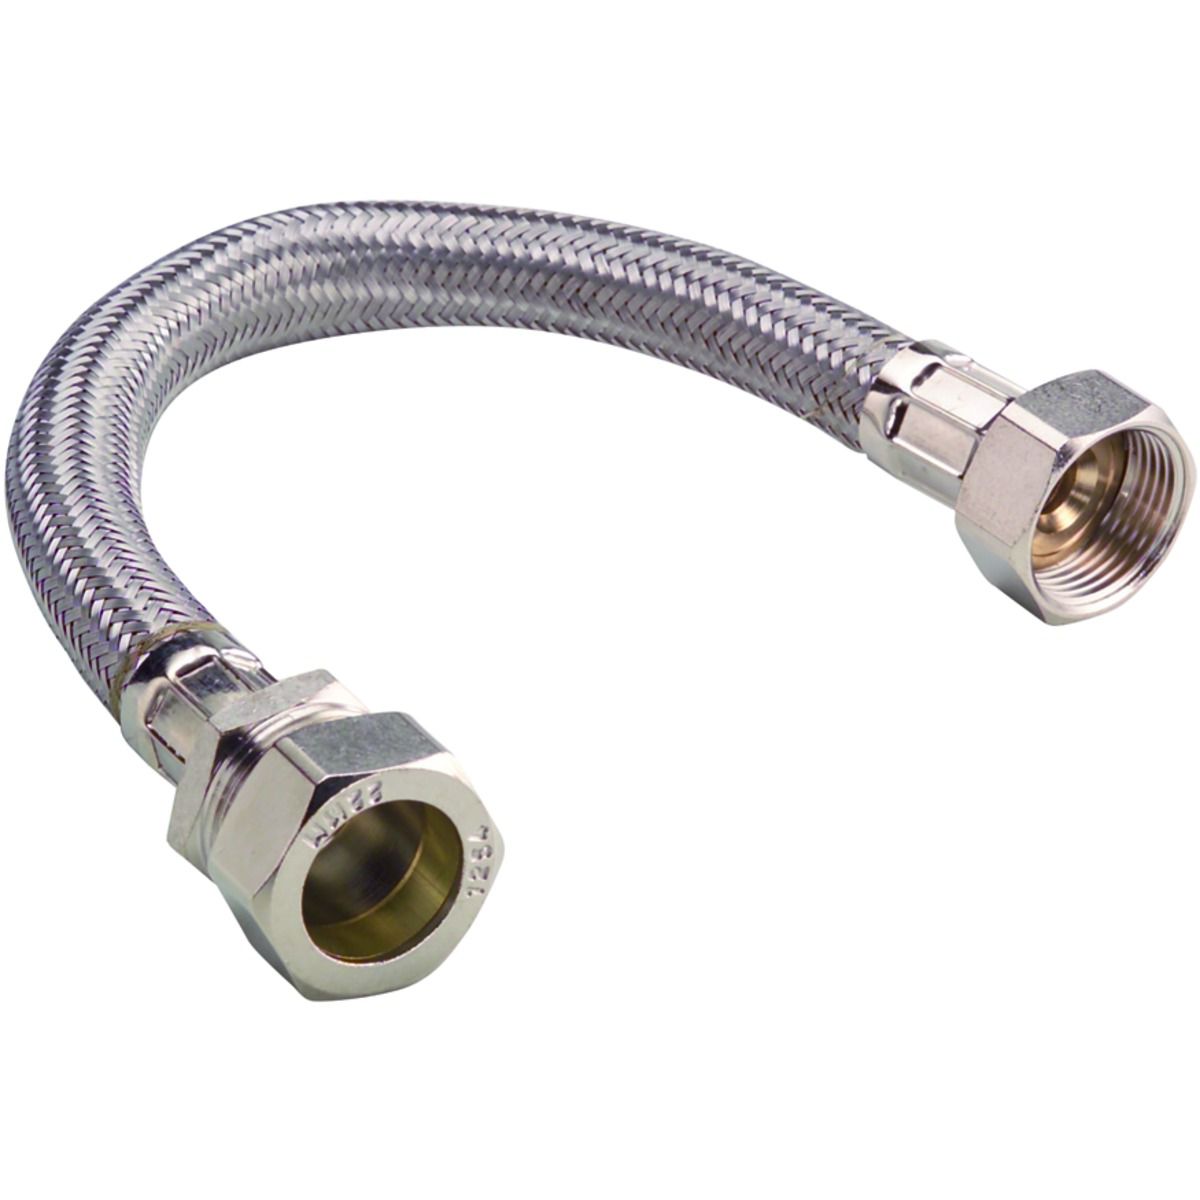 Image of Primaflow Flexible Tap Connector - 15 X 12 X 500mm